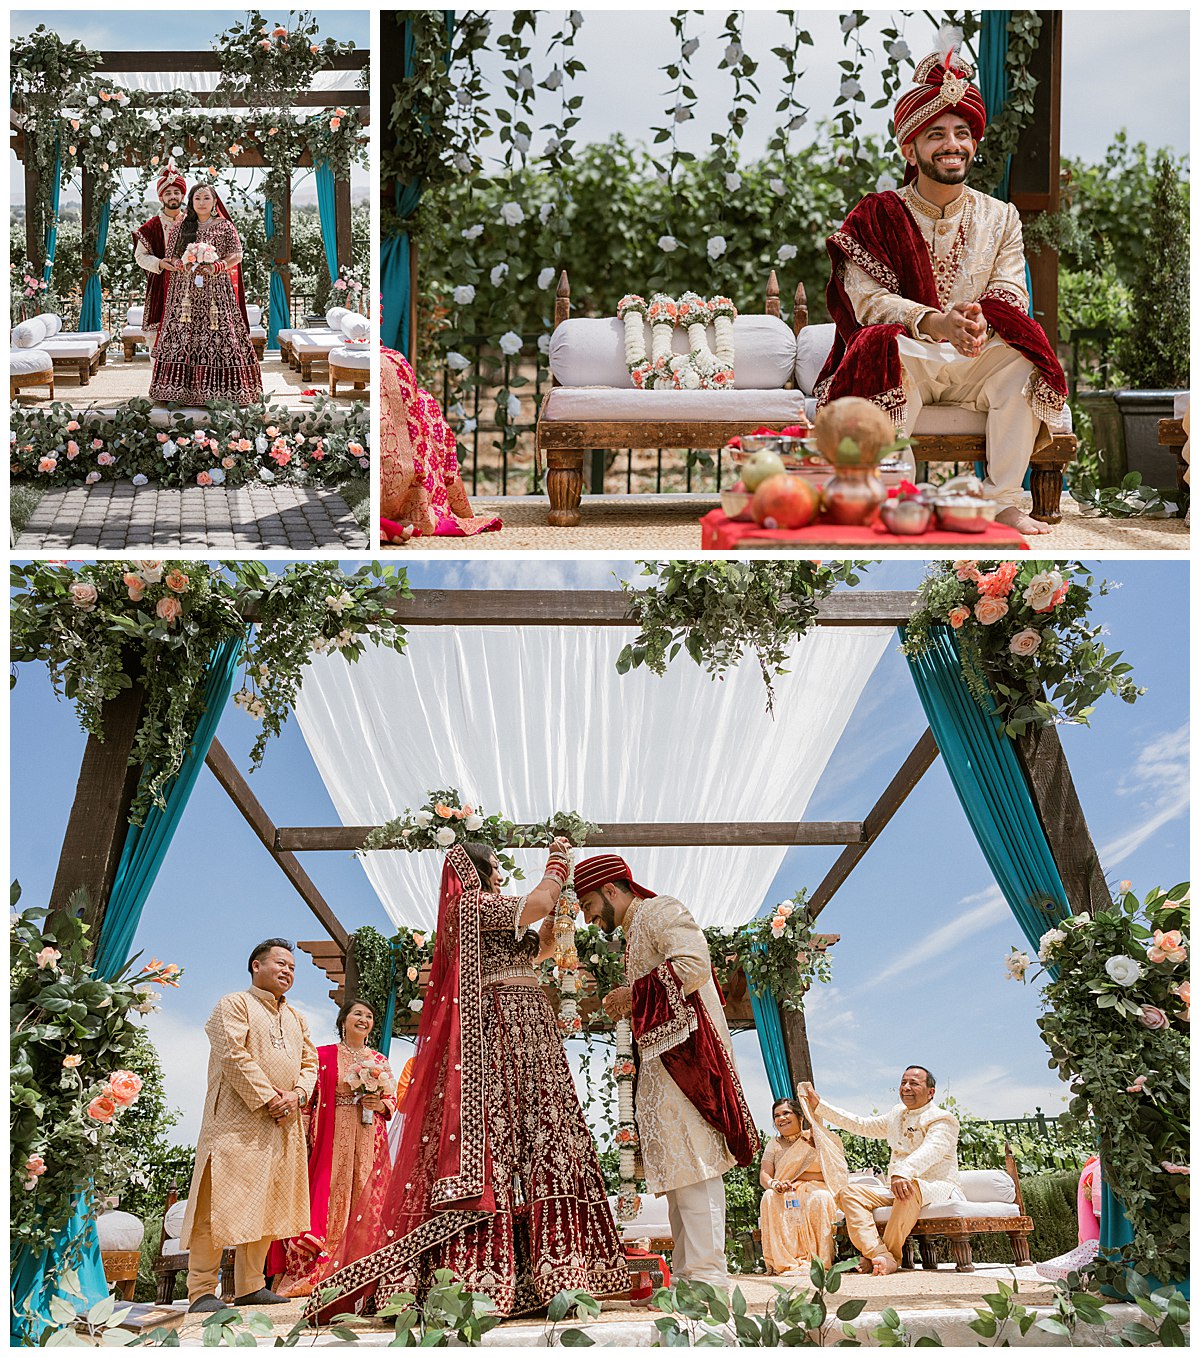 Indian wedding ceremony for Nancy and Aakash